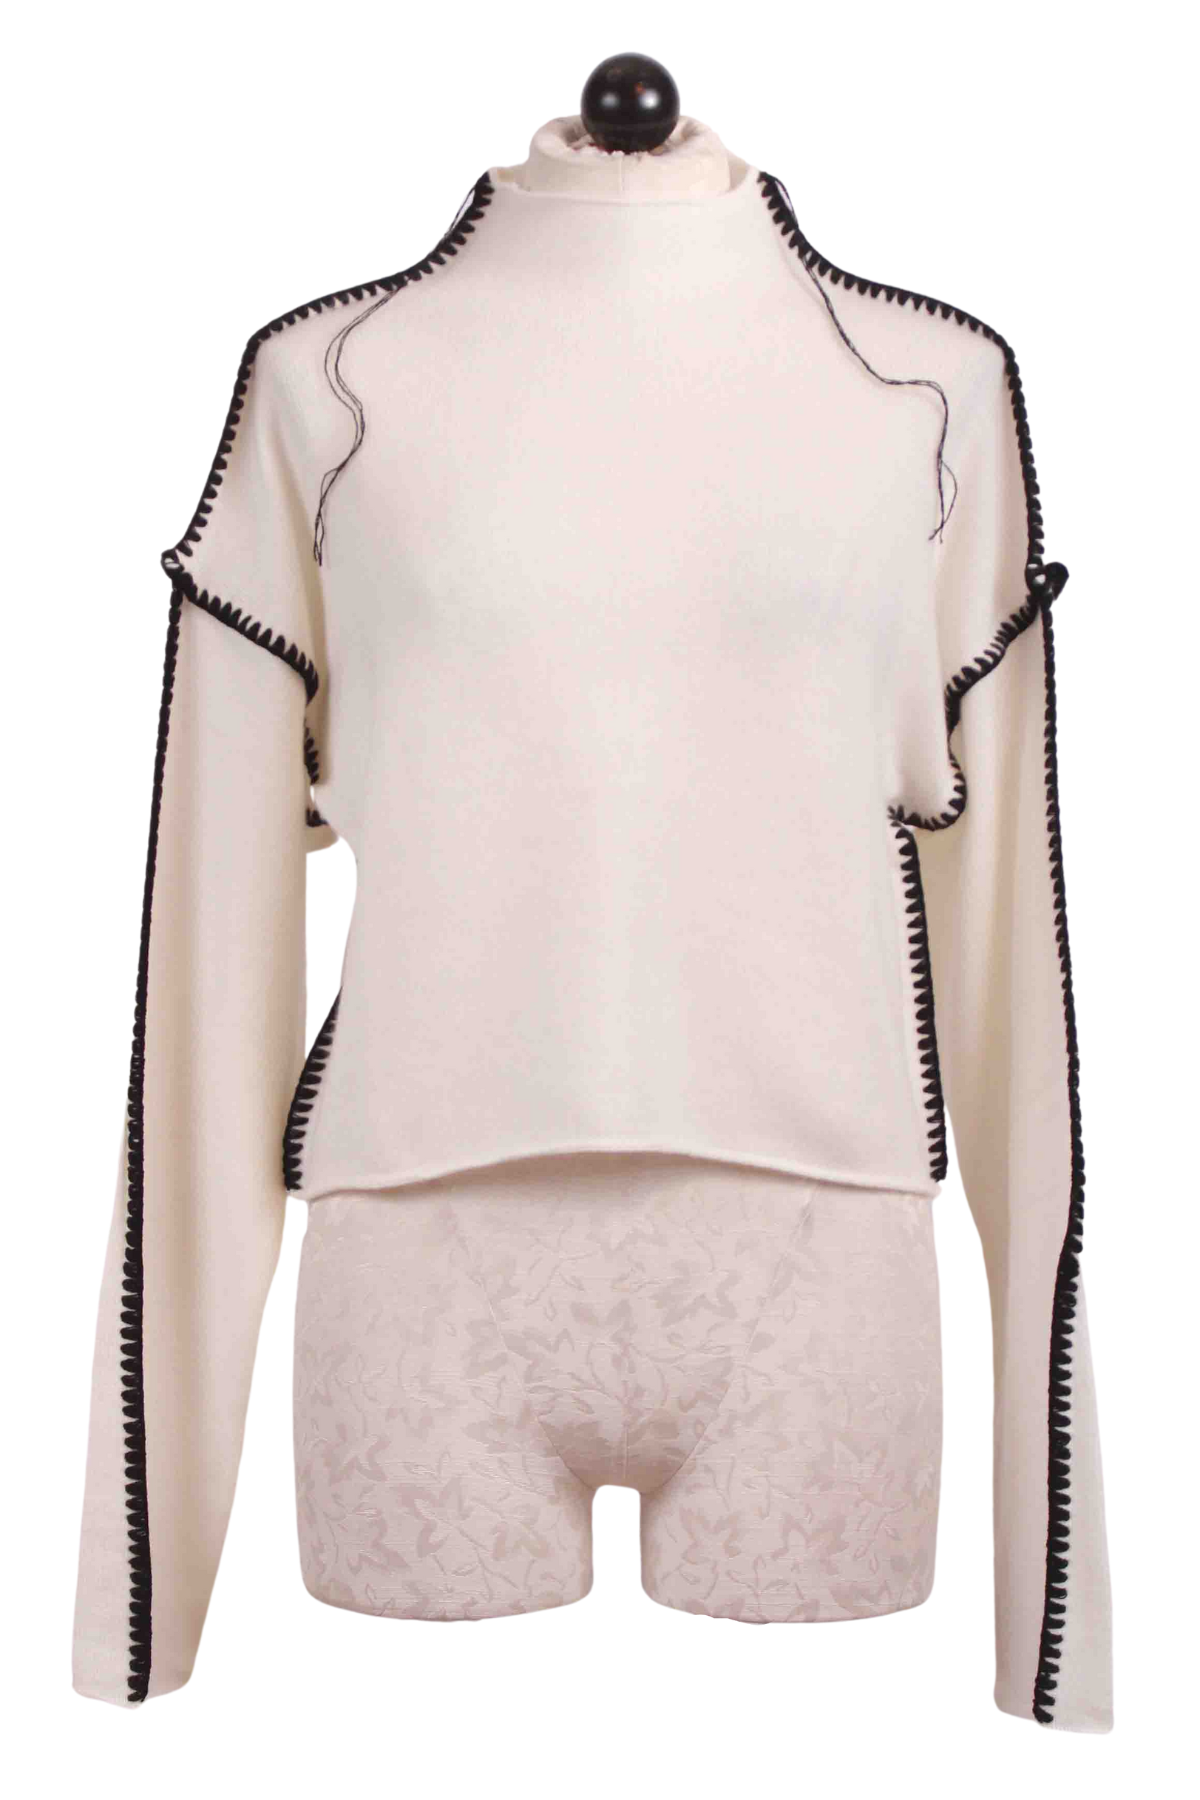 Cream Mock Neck Annie Cashmere Cropped Sweater by Chan Luu with Black Contrast Stitching